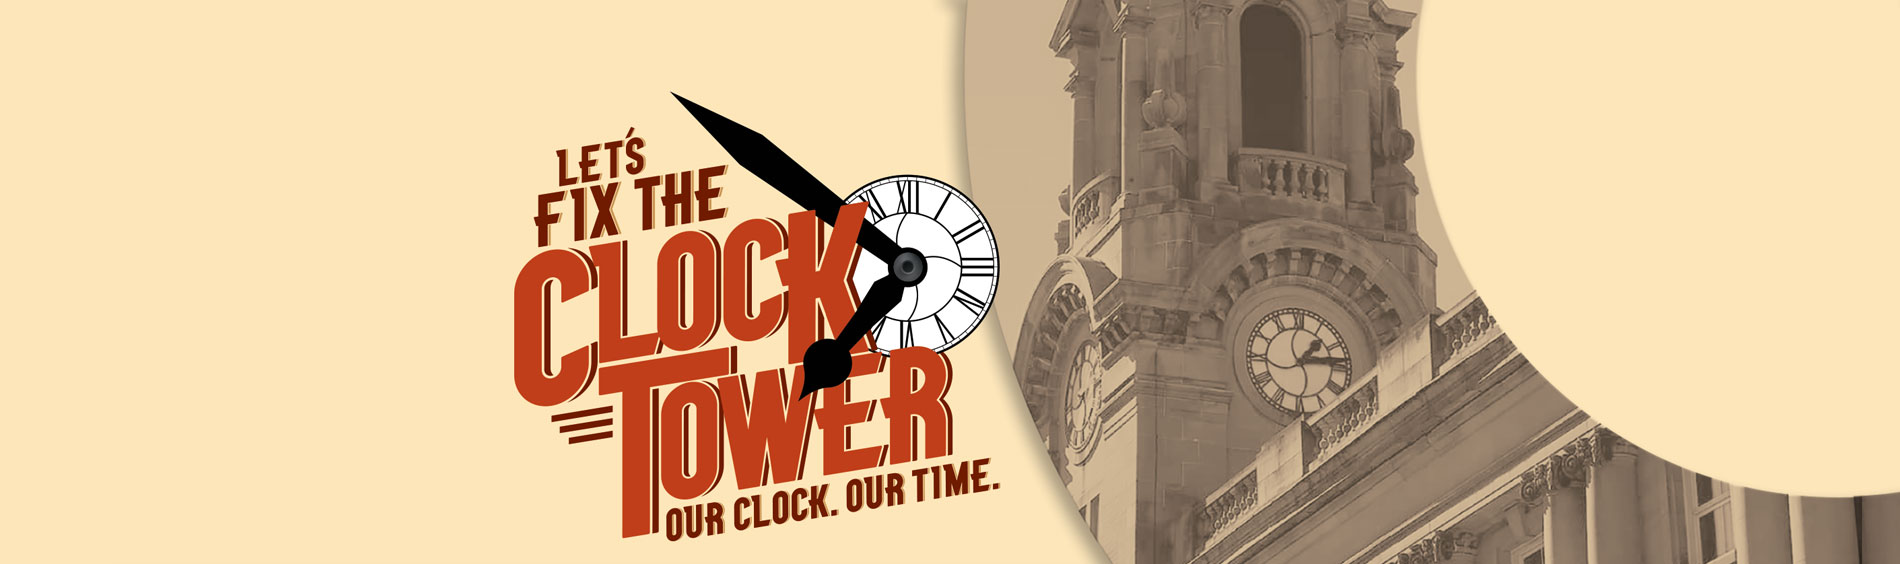 Back to the future Clock Tower Restoration Campaign